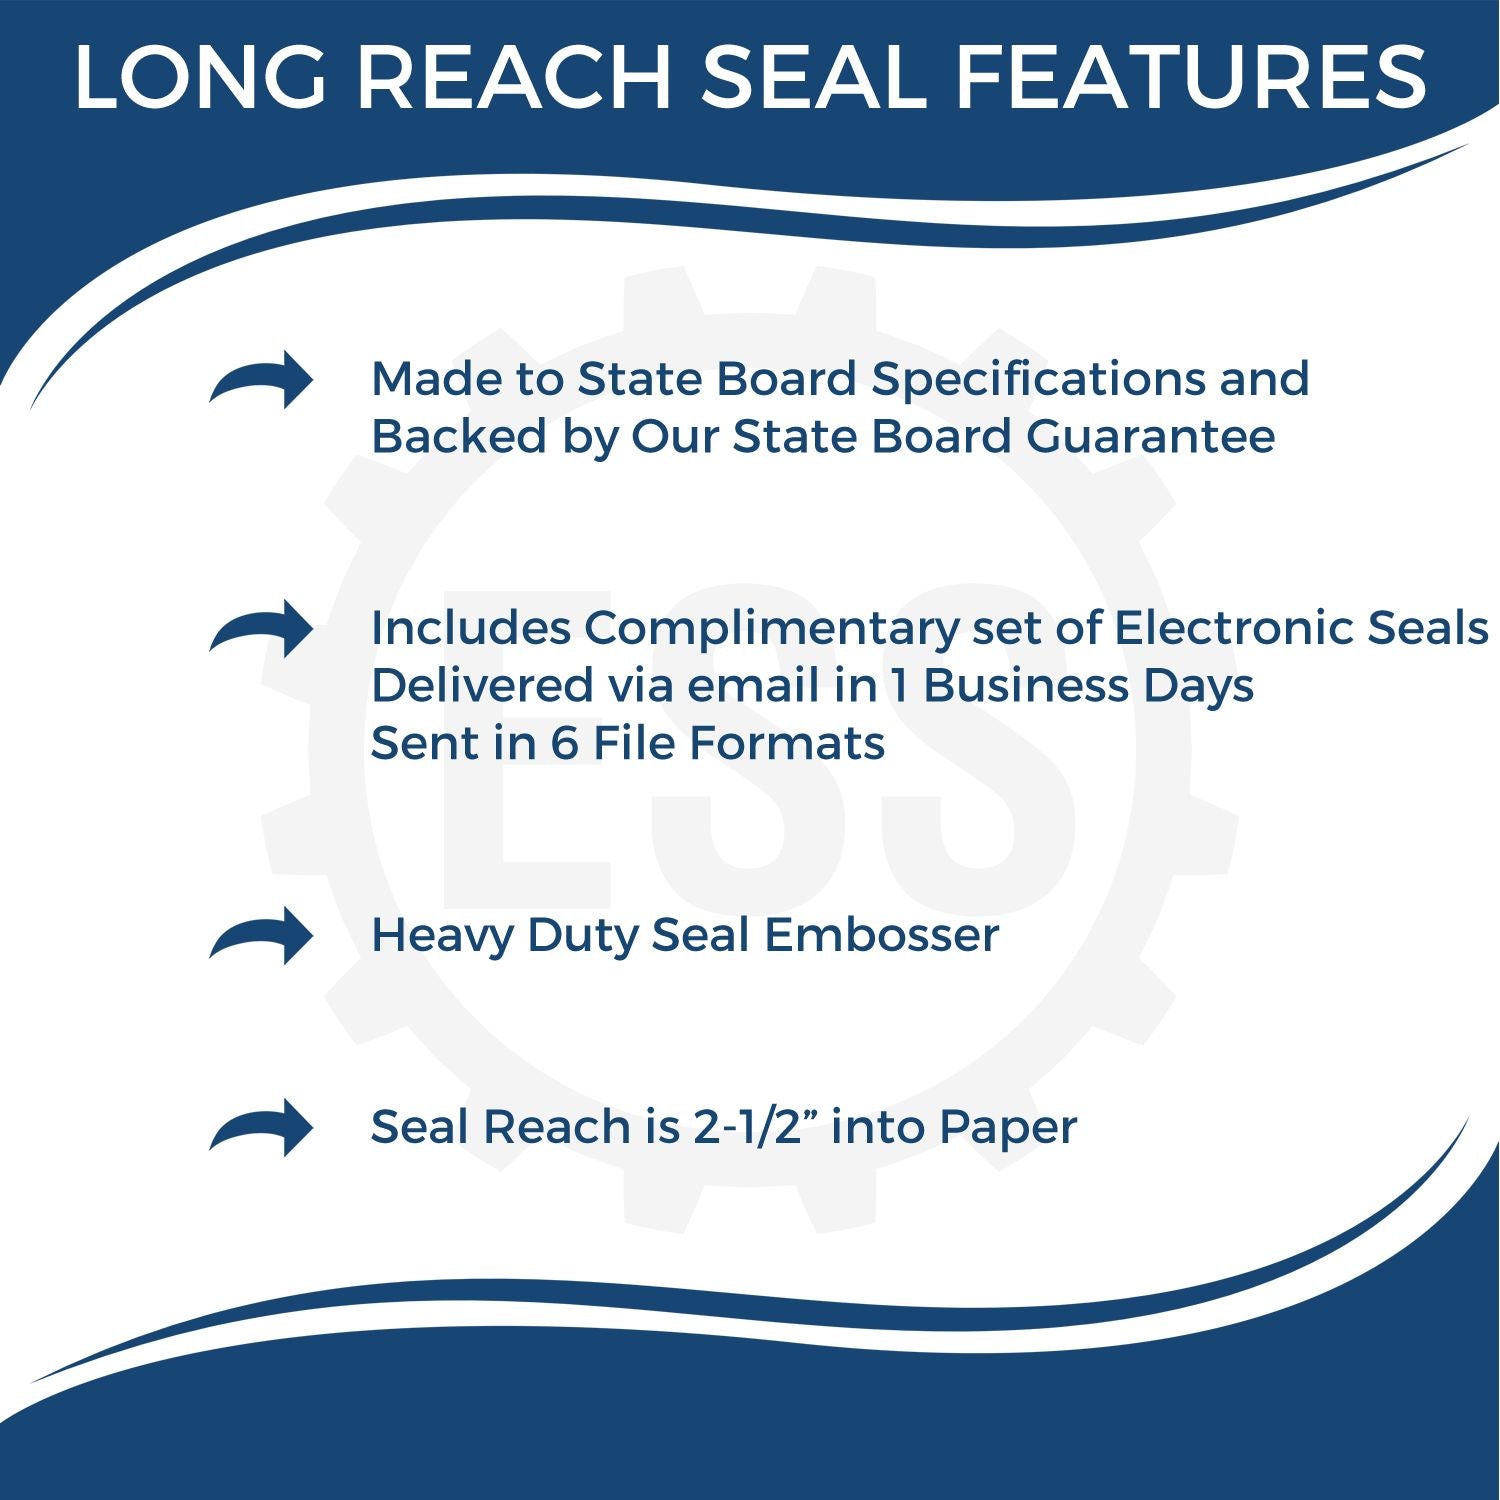 The main image for the Long Reach Mississippi PE Seal depicting a sample of the imprint and electronic files